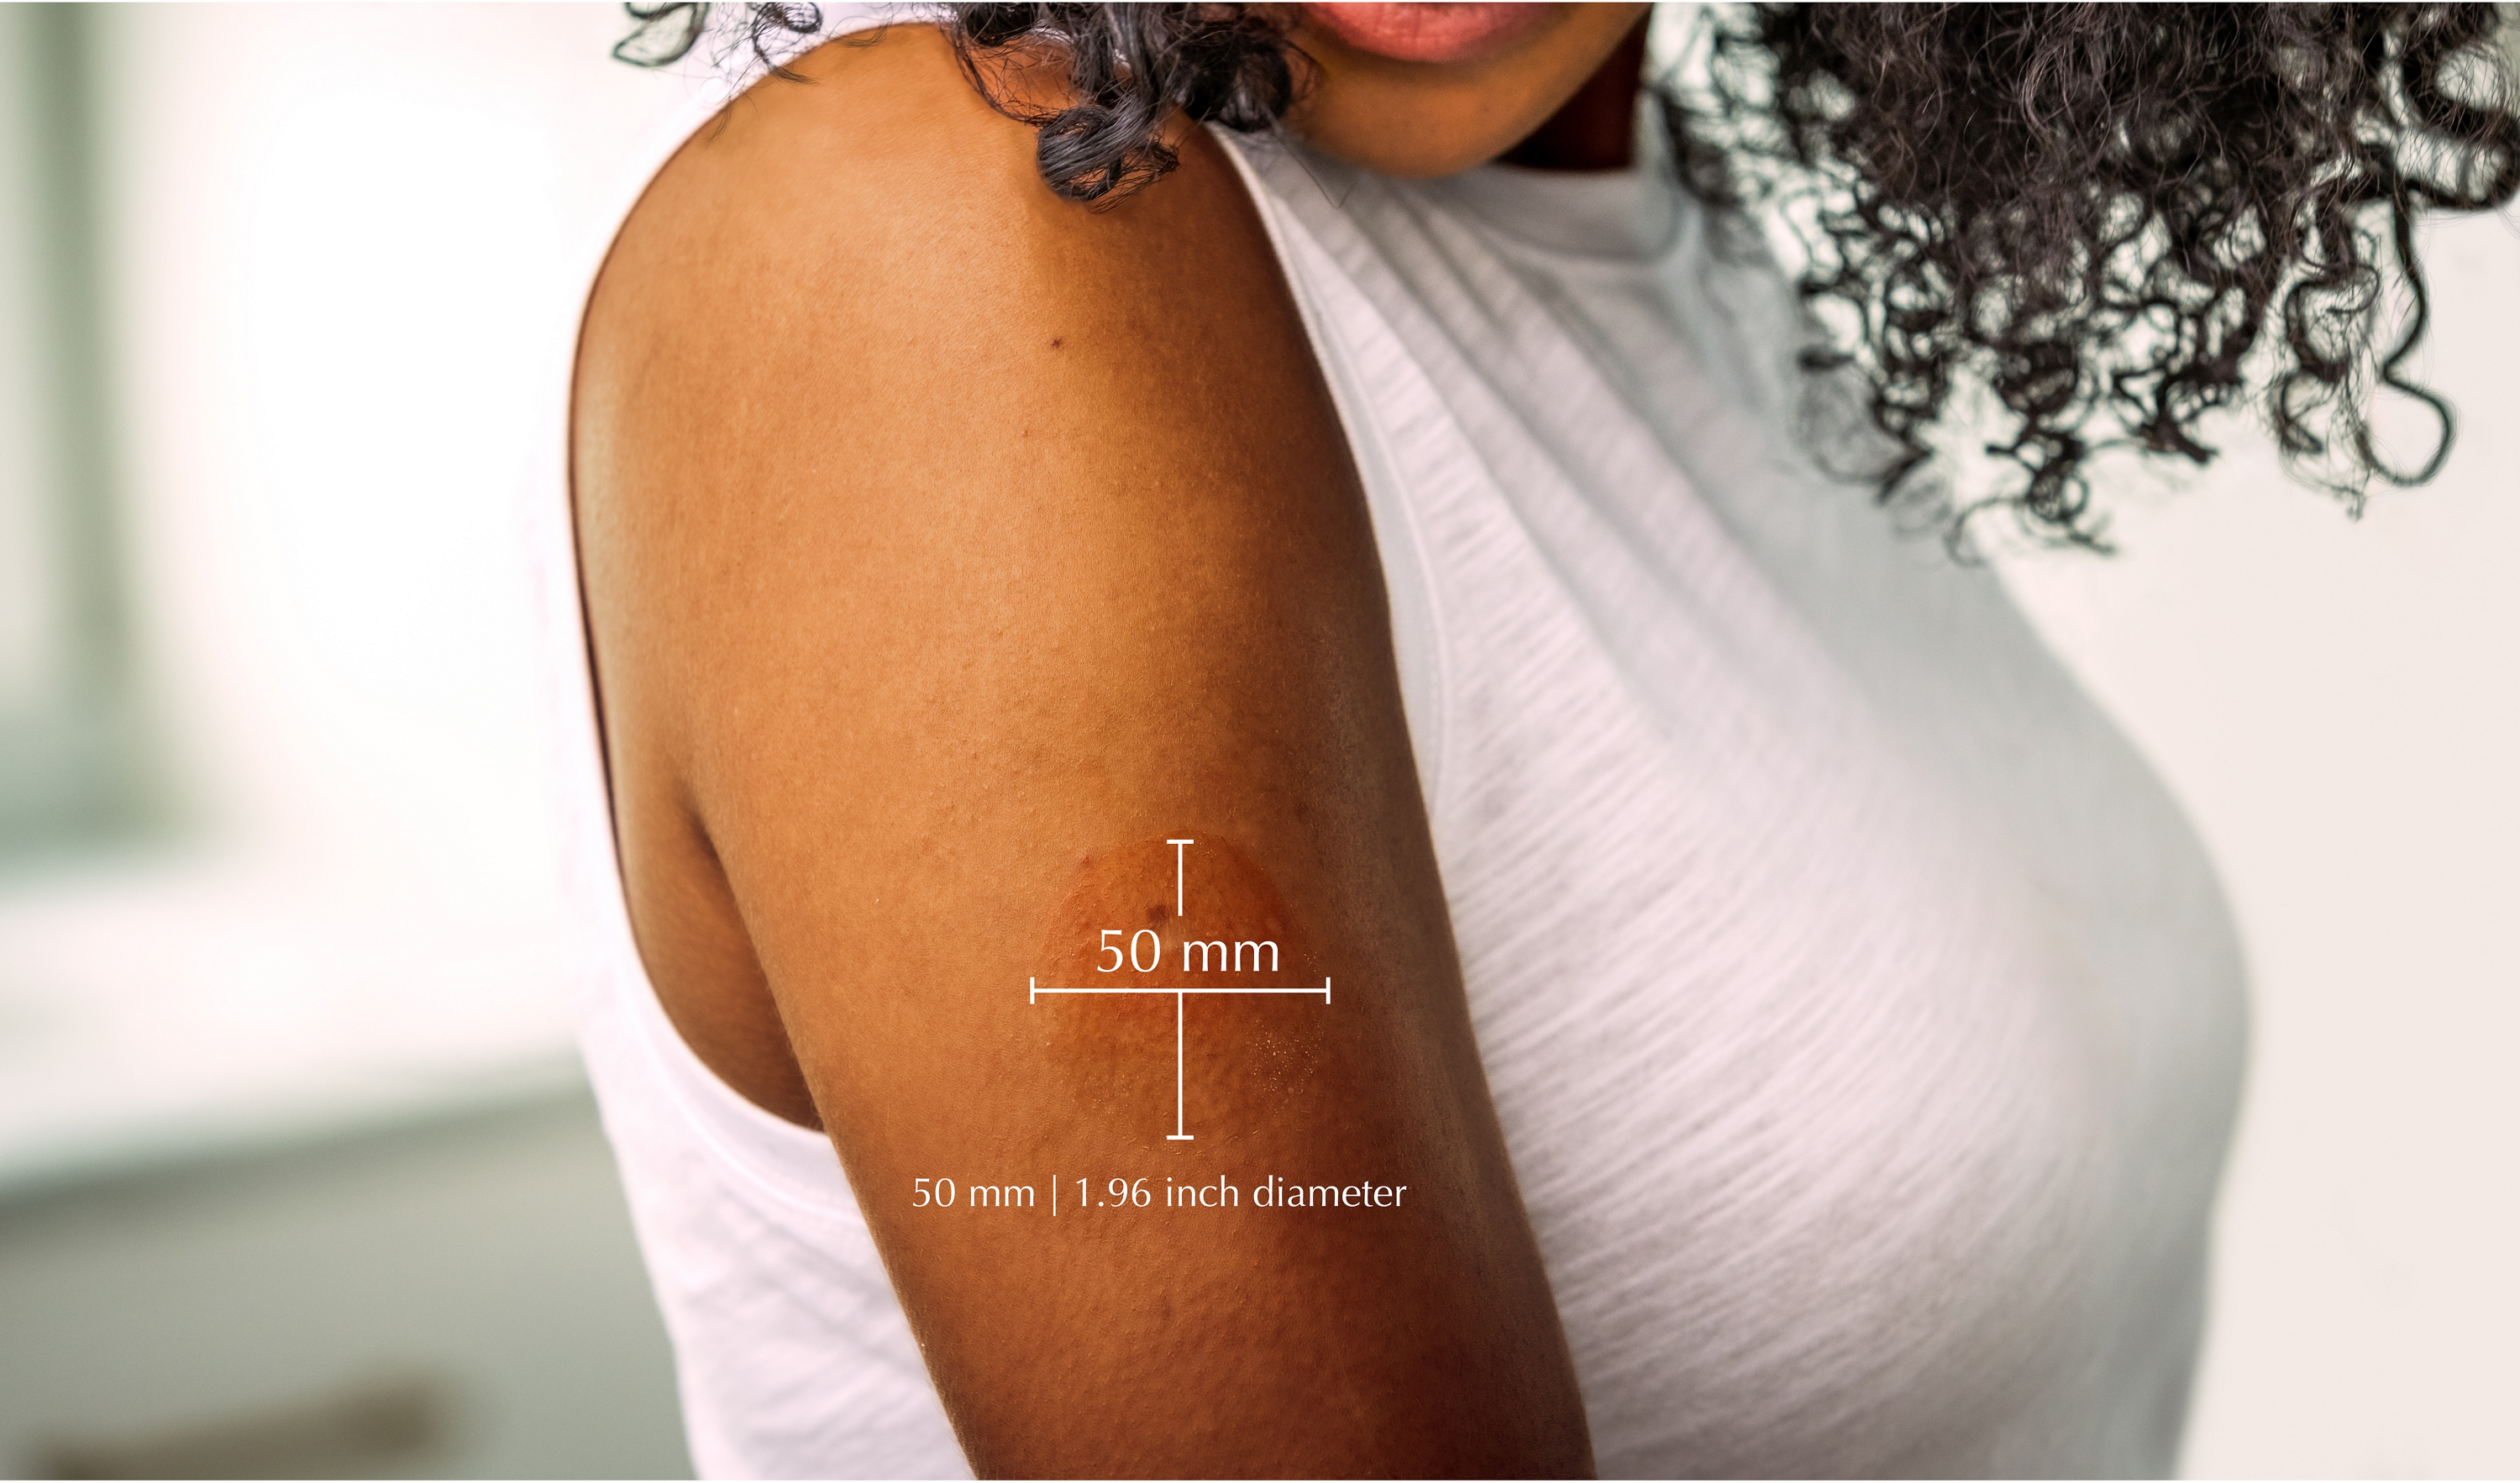 re/cover™ Eczema Relief System